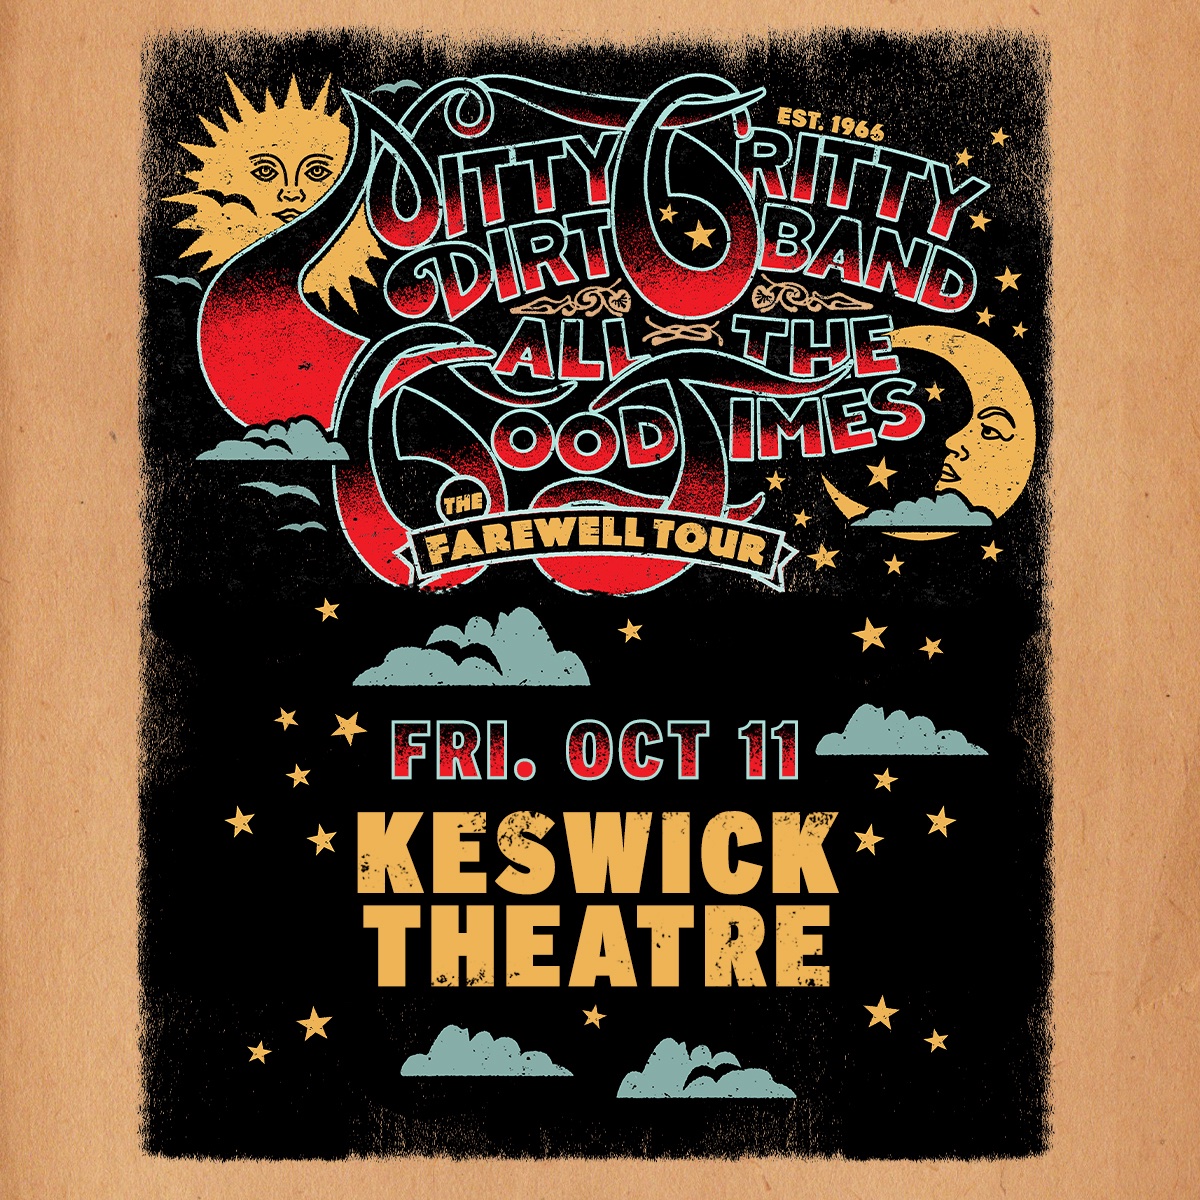 NEW SHOW! Nitty Gritty Dirt Band’s “All the Good Times” Farewell Tour hits Keswick Theatre on 10/11. Tickets go on sale Friday at 10am!